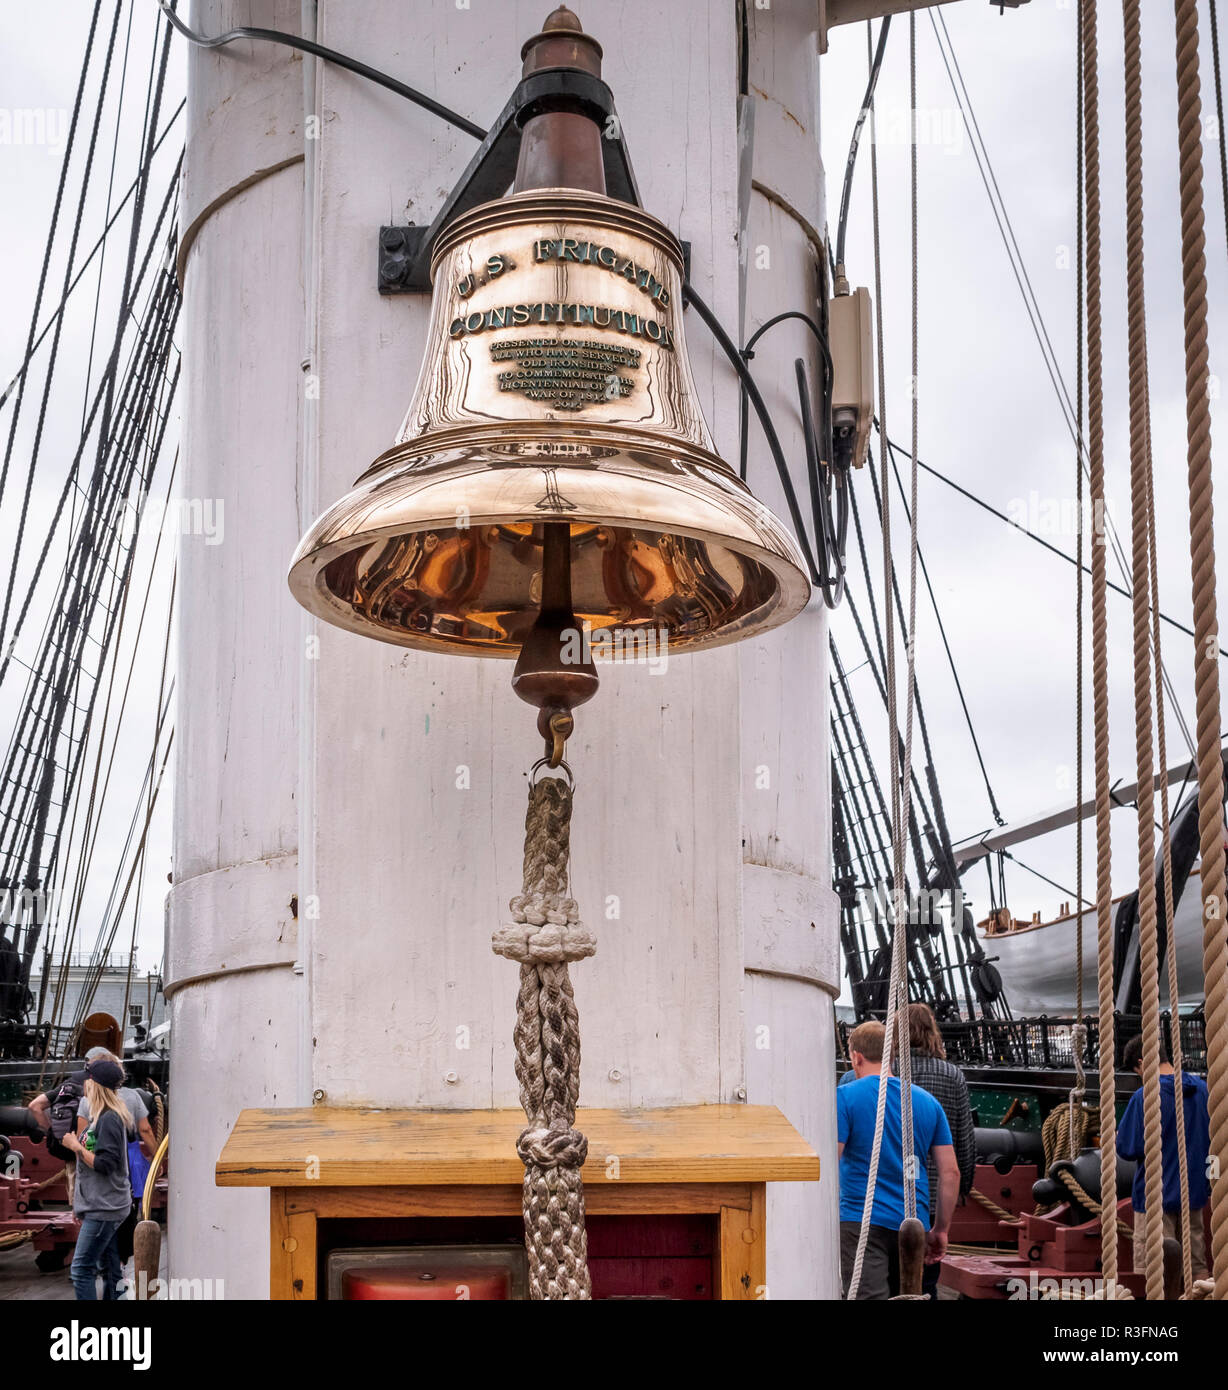 A historic bell from world's oldest naval vessel still afloat - USS Consituttion, i.e. U.S. Frigate Constitution in Boston, USA Stock Photo